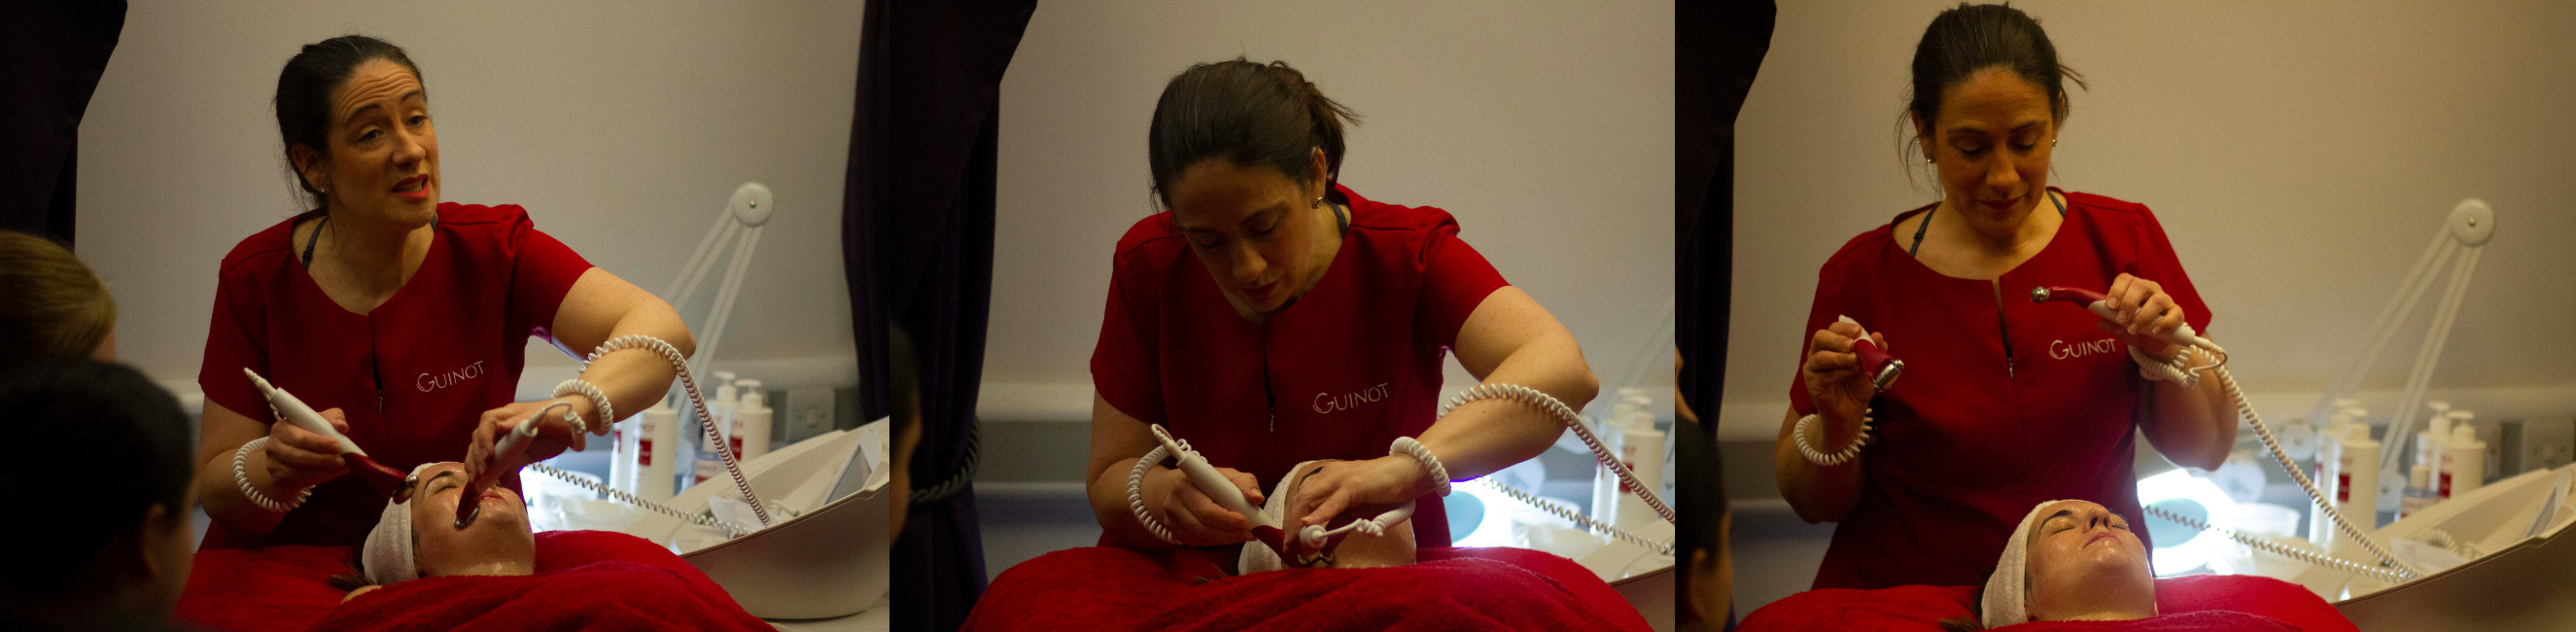 Learner taking part in demonstration with Guinot